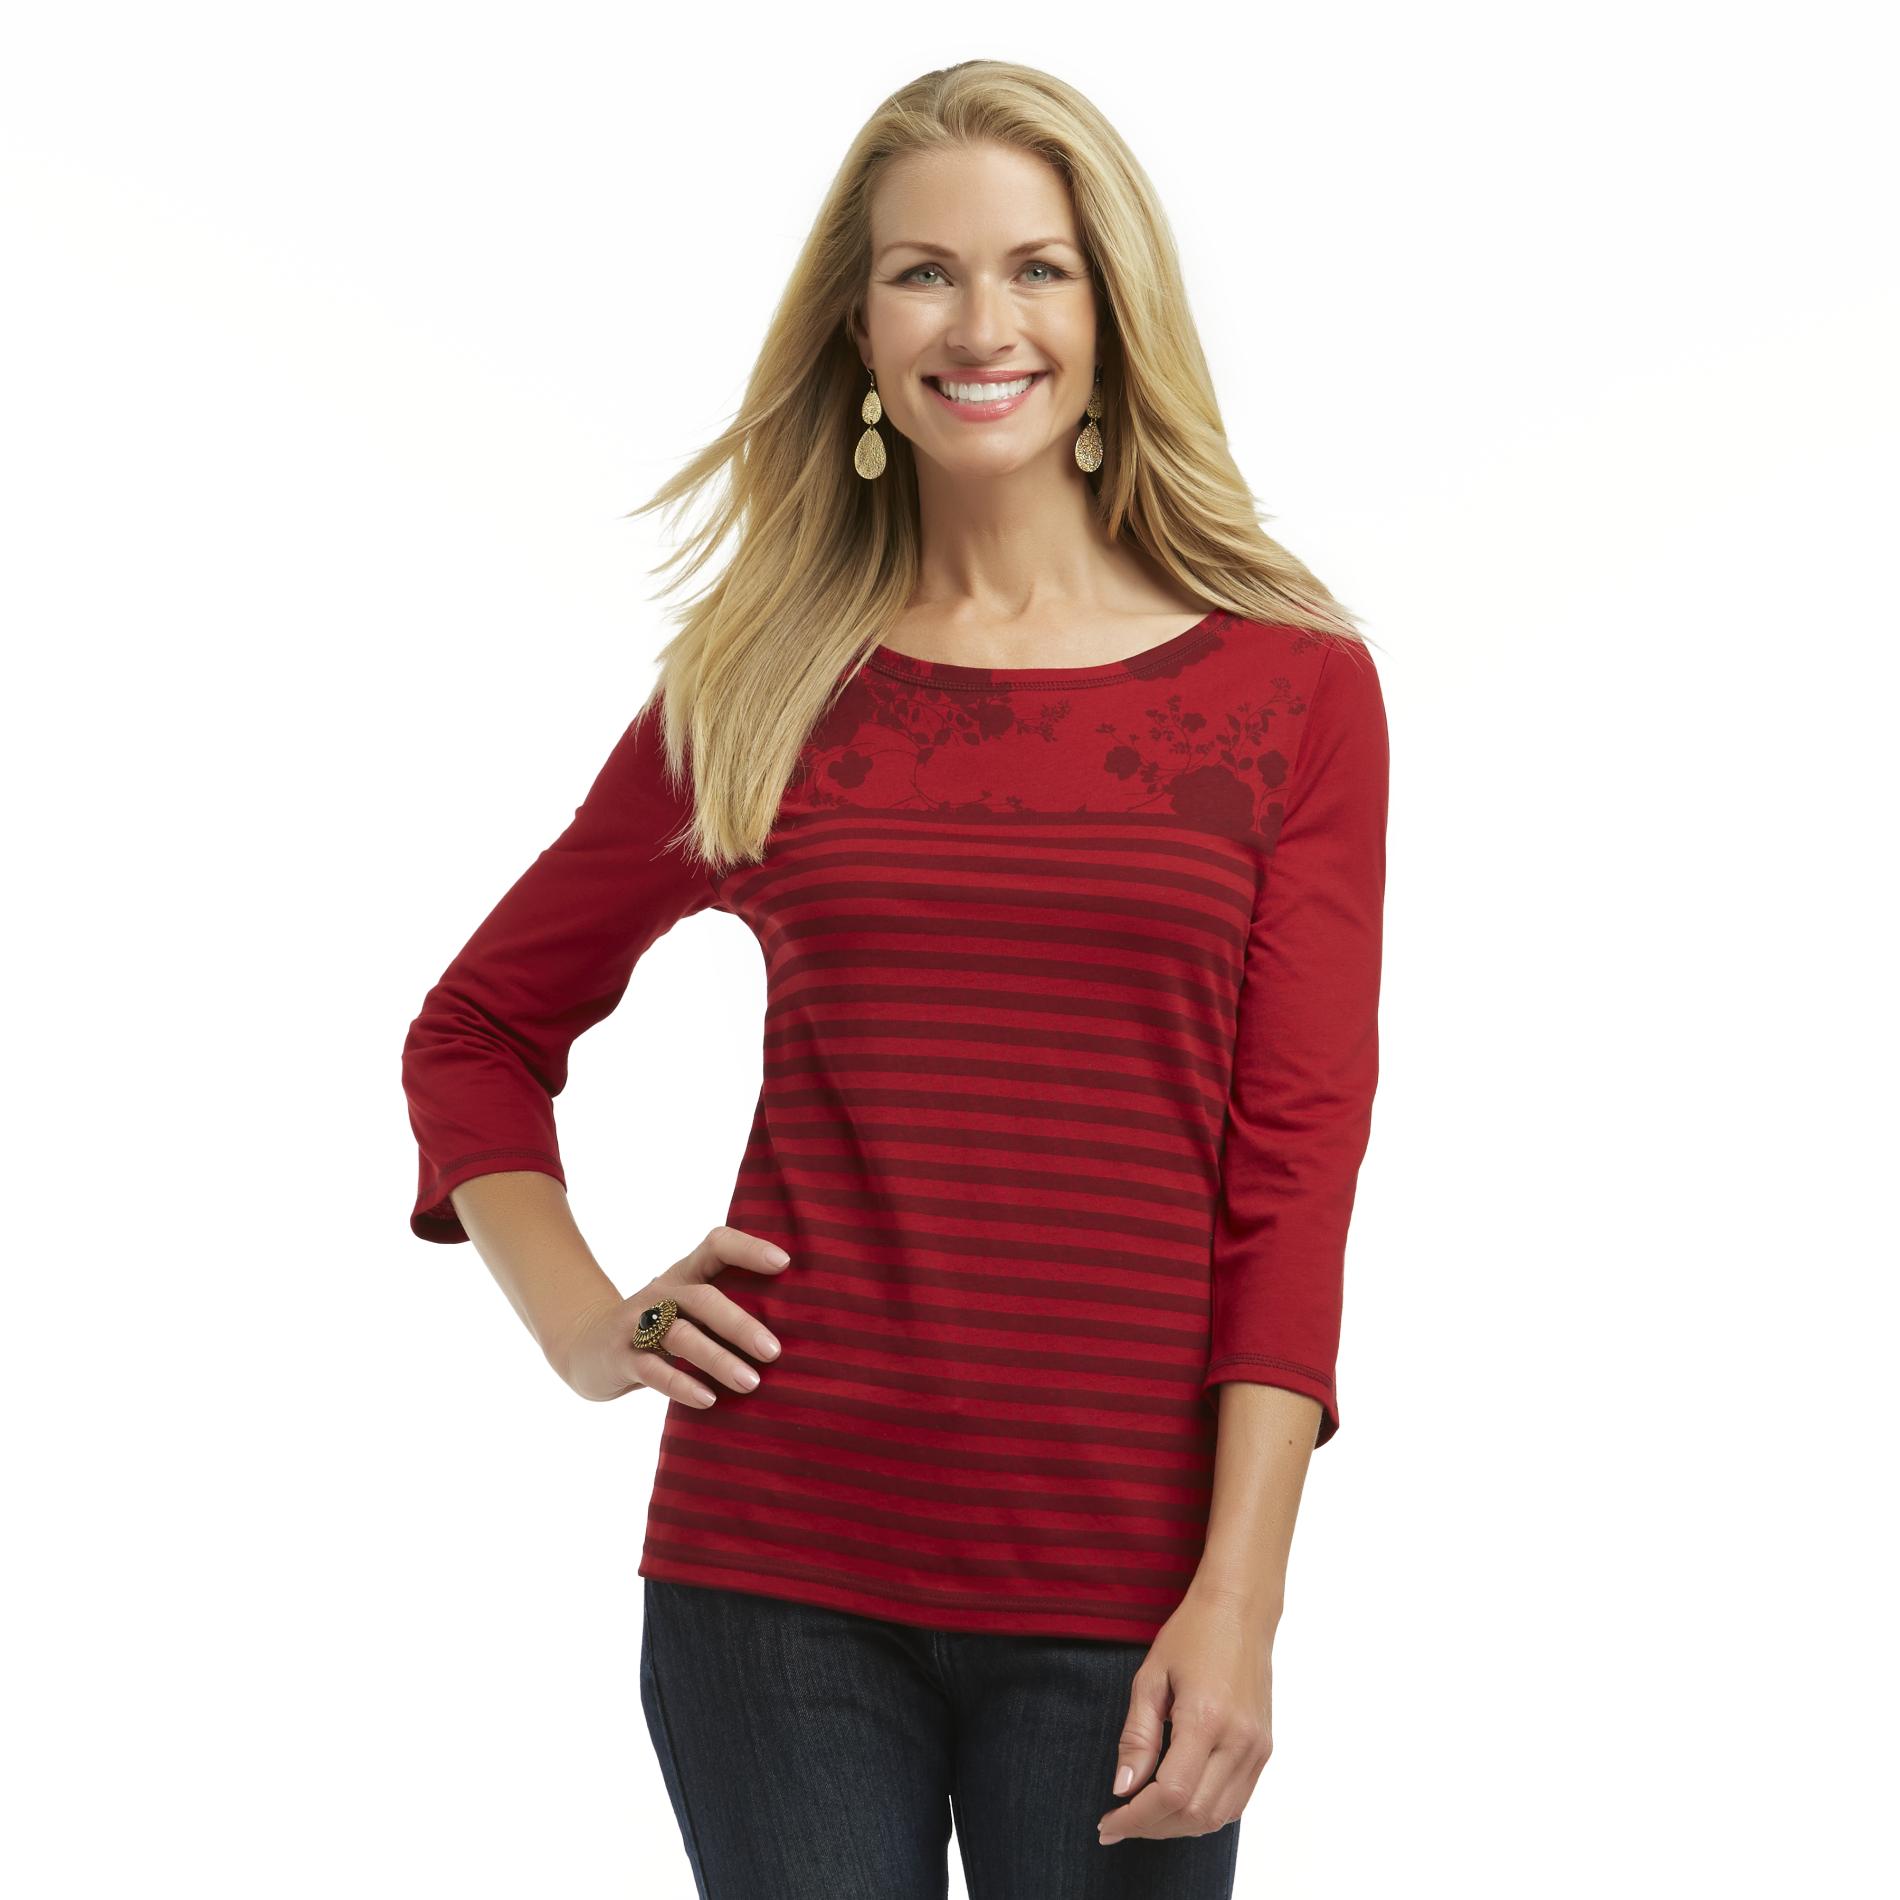 Basic Editions Women's Knit Top - Striped & Floral